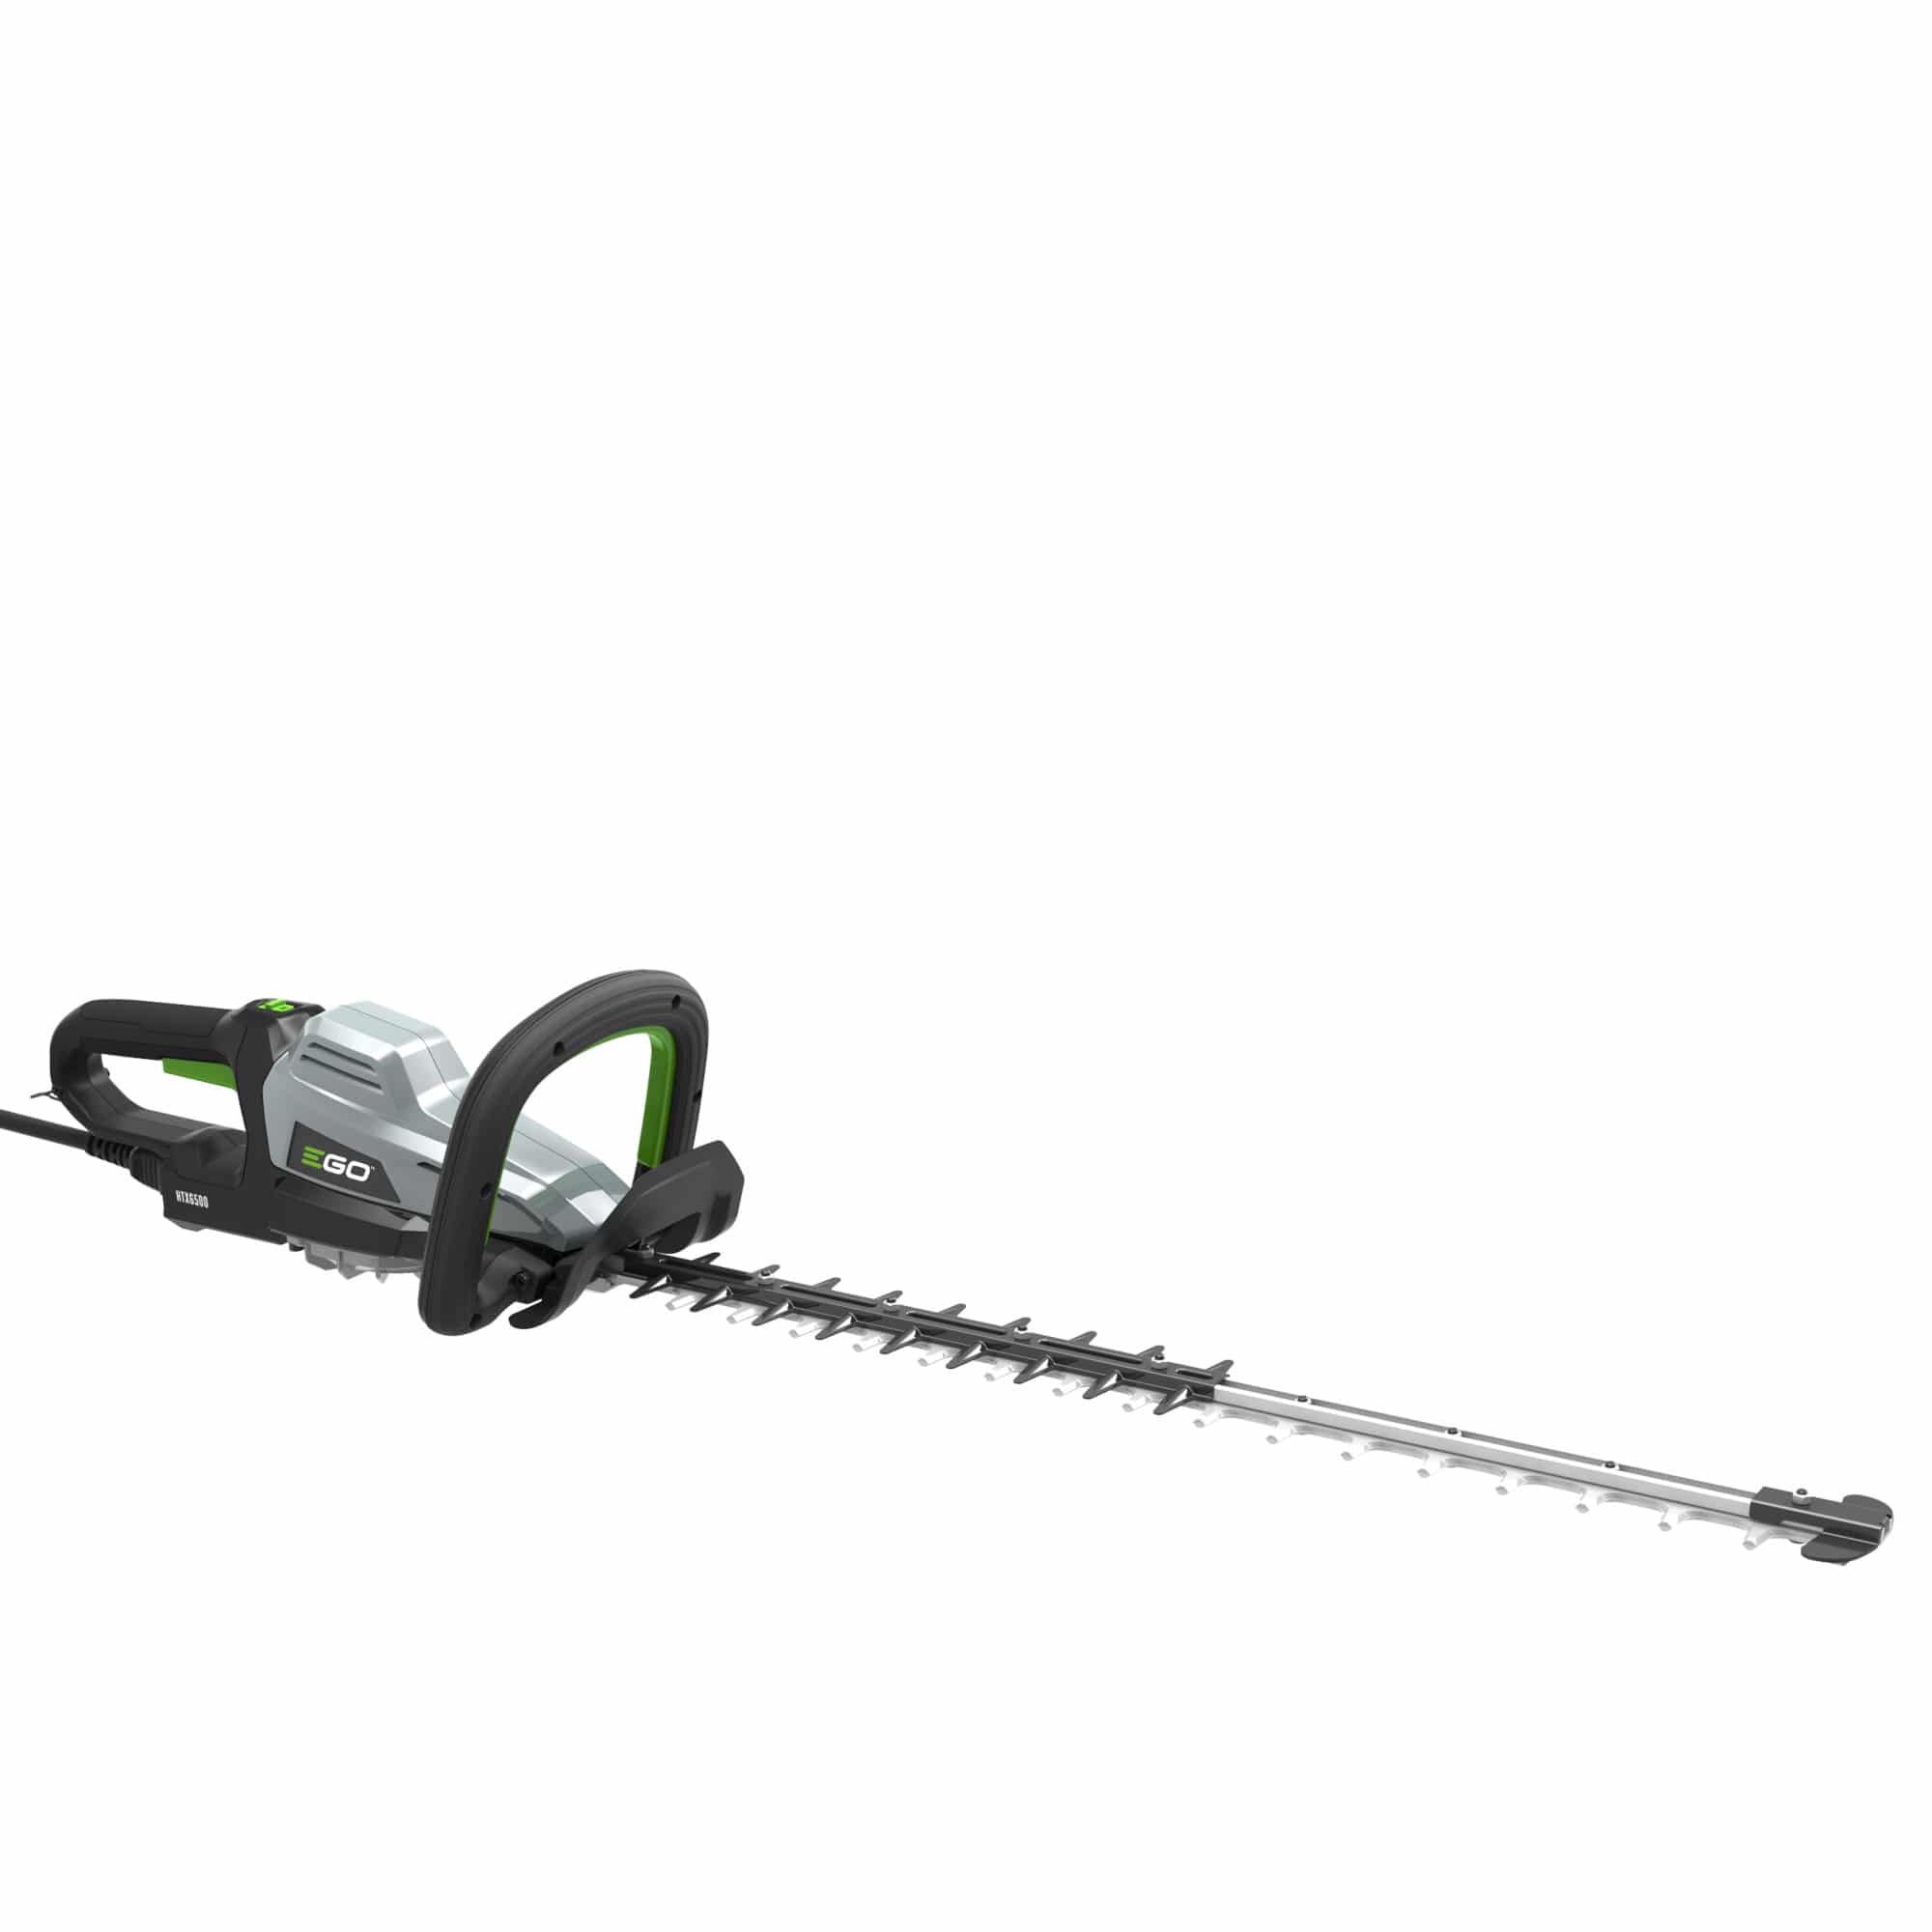 EGO HTX6500 Battery Hedge Trimmer